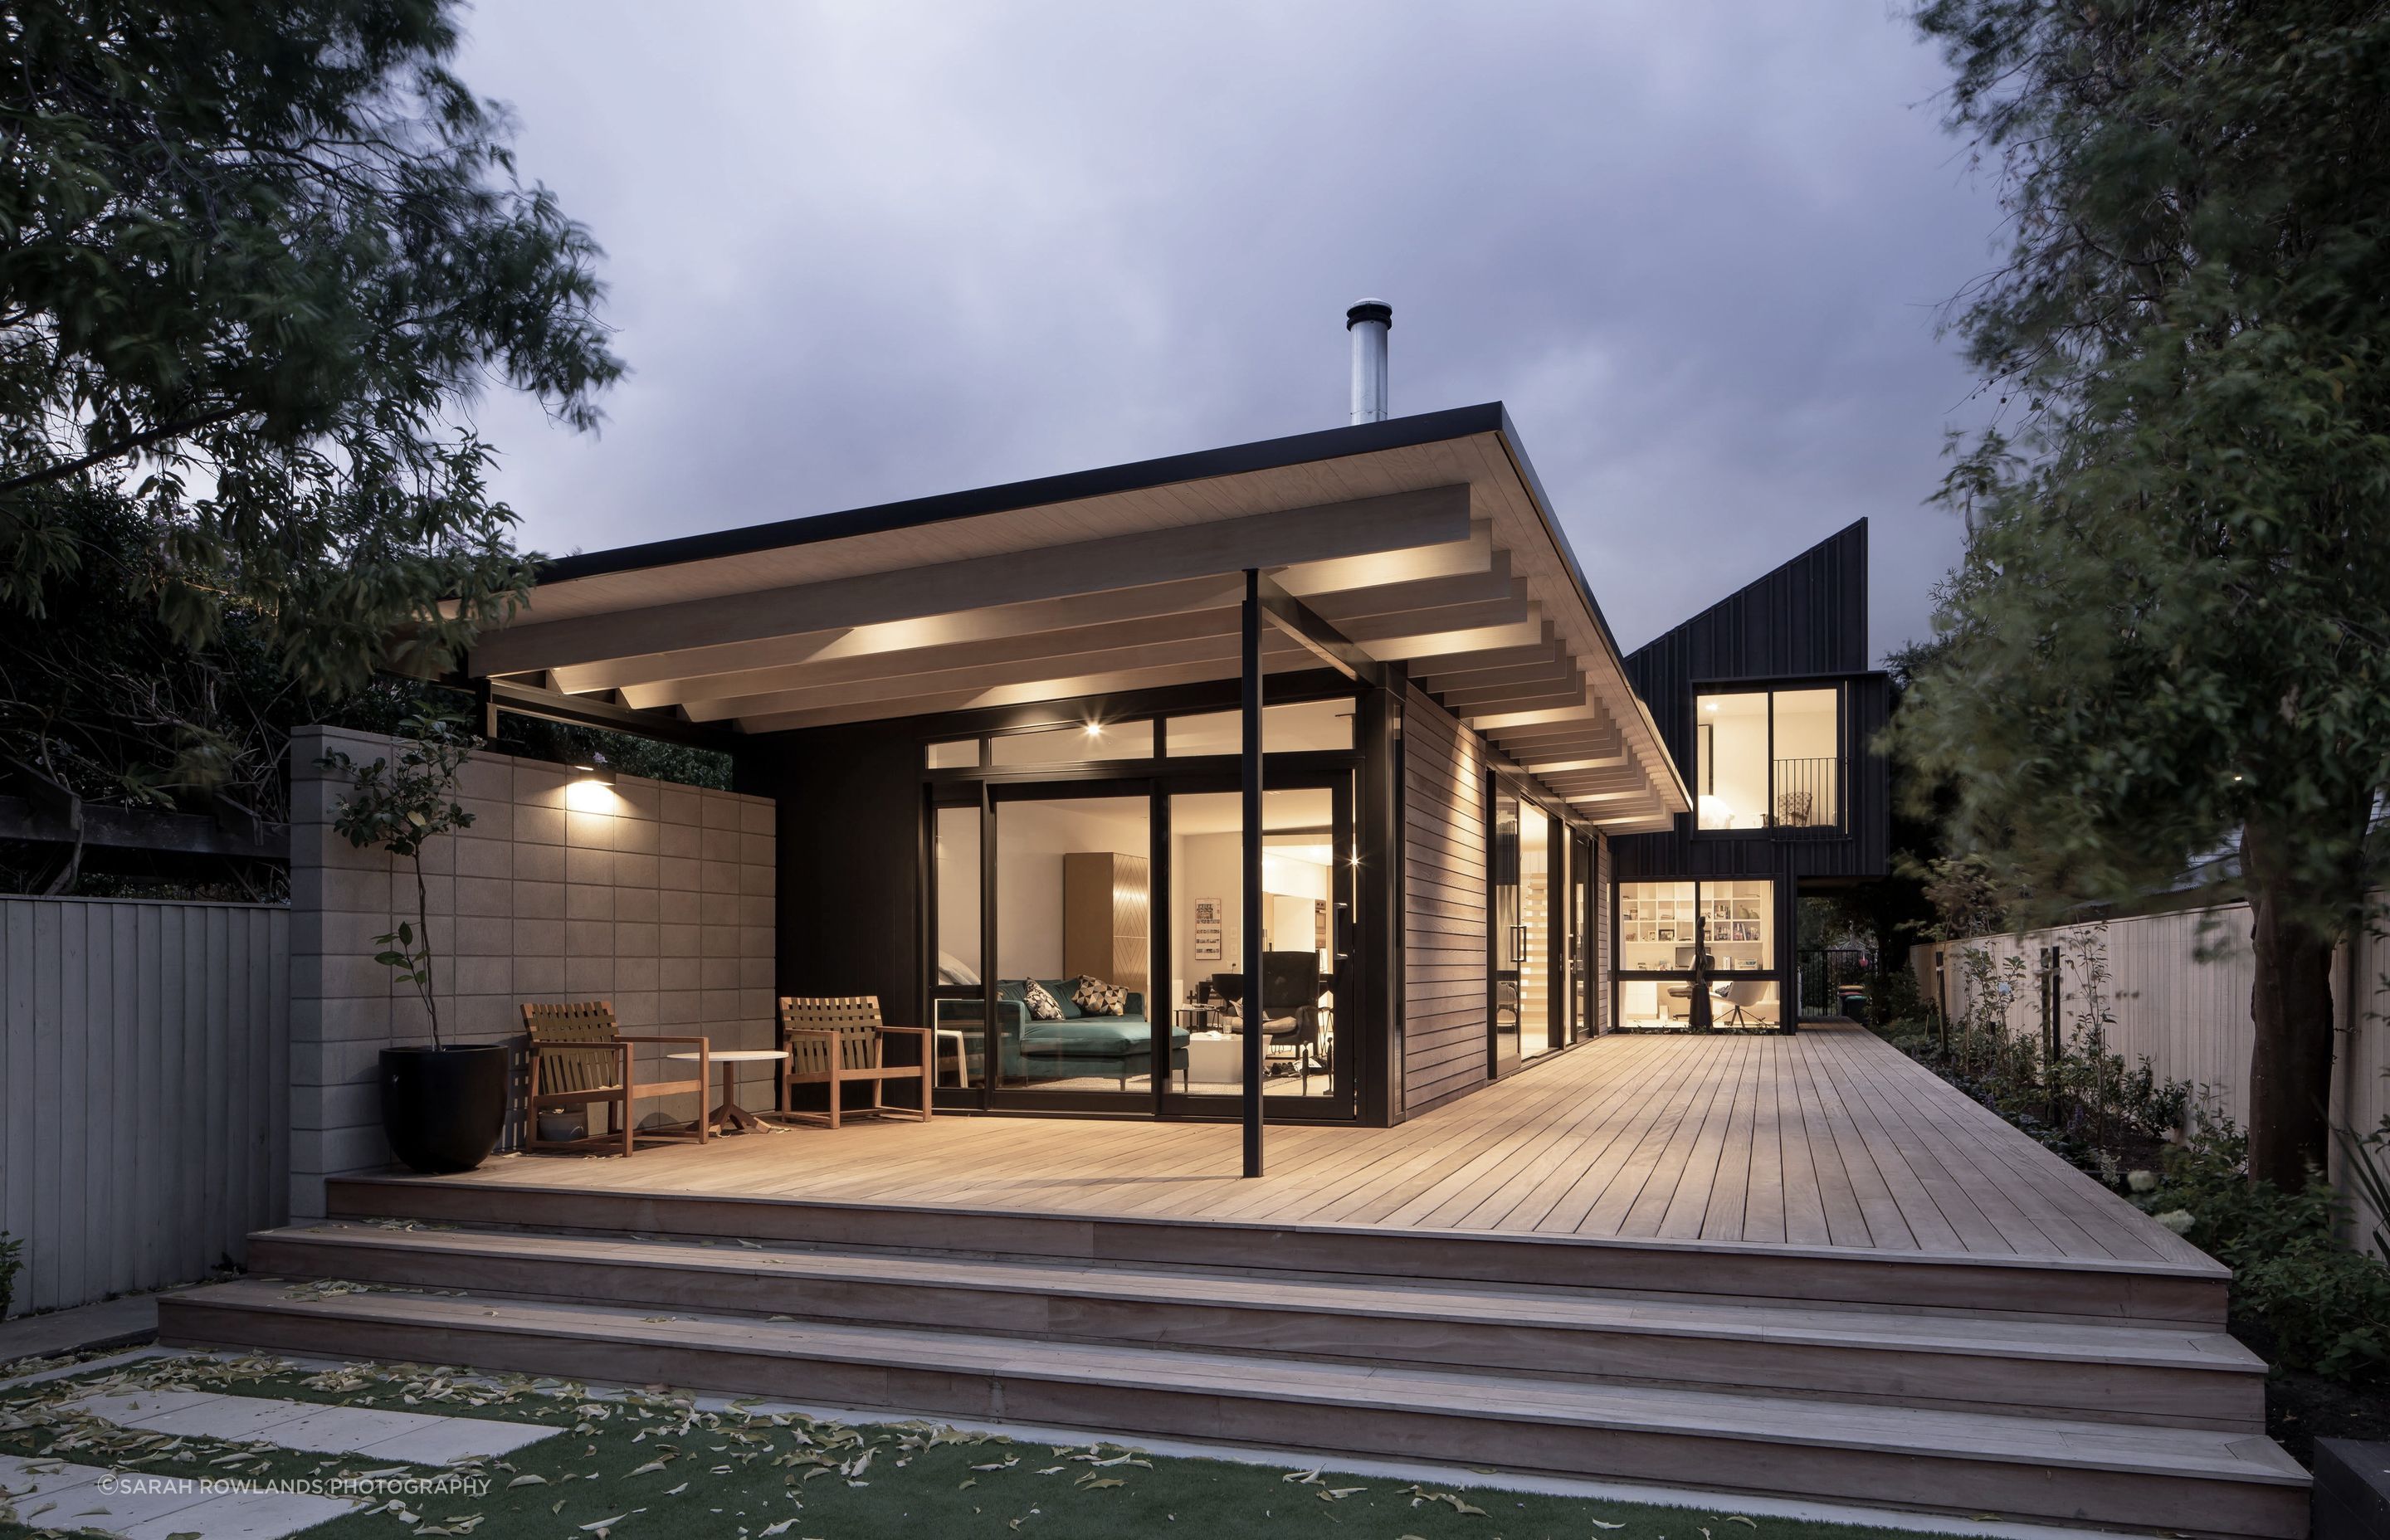 The homeowner wanted the house to feel connected to the outdoors so an ample deck and cantilevered roofline maximises outdoor living opportunities.